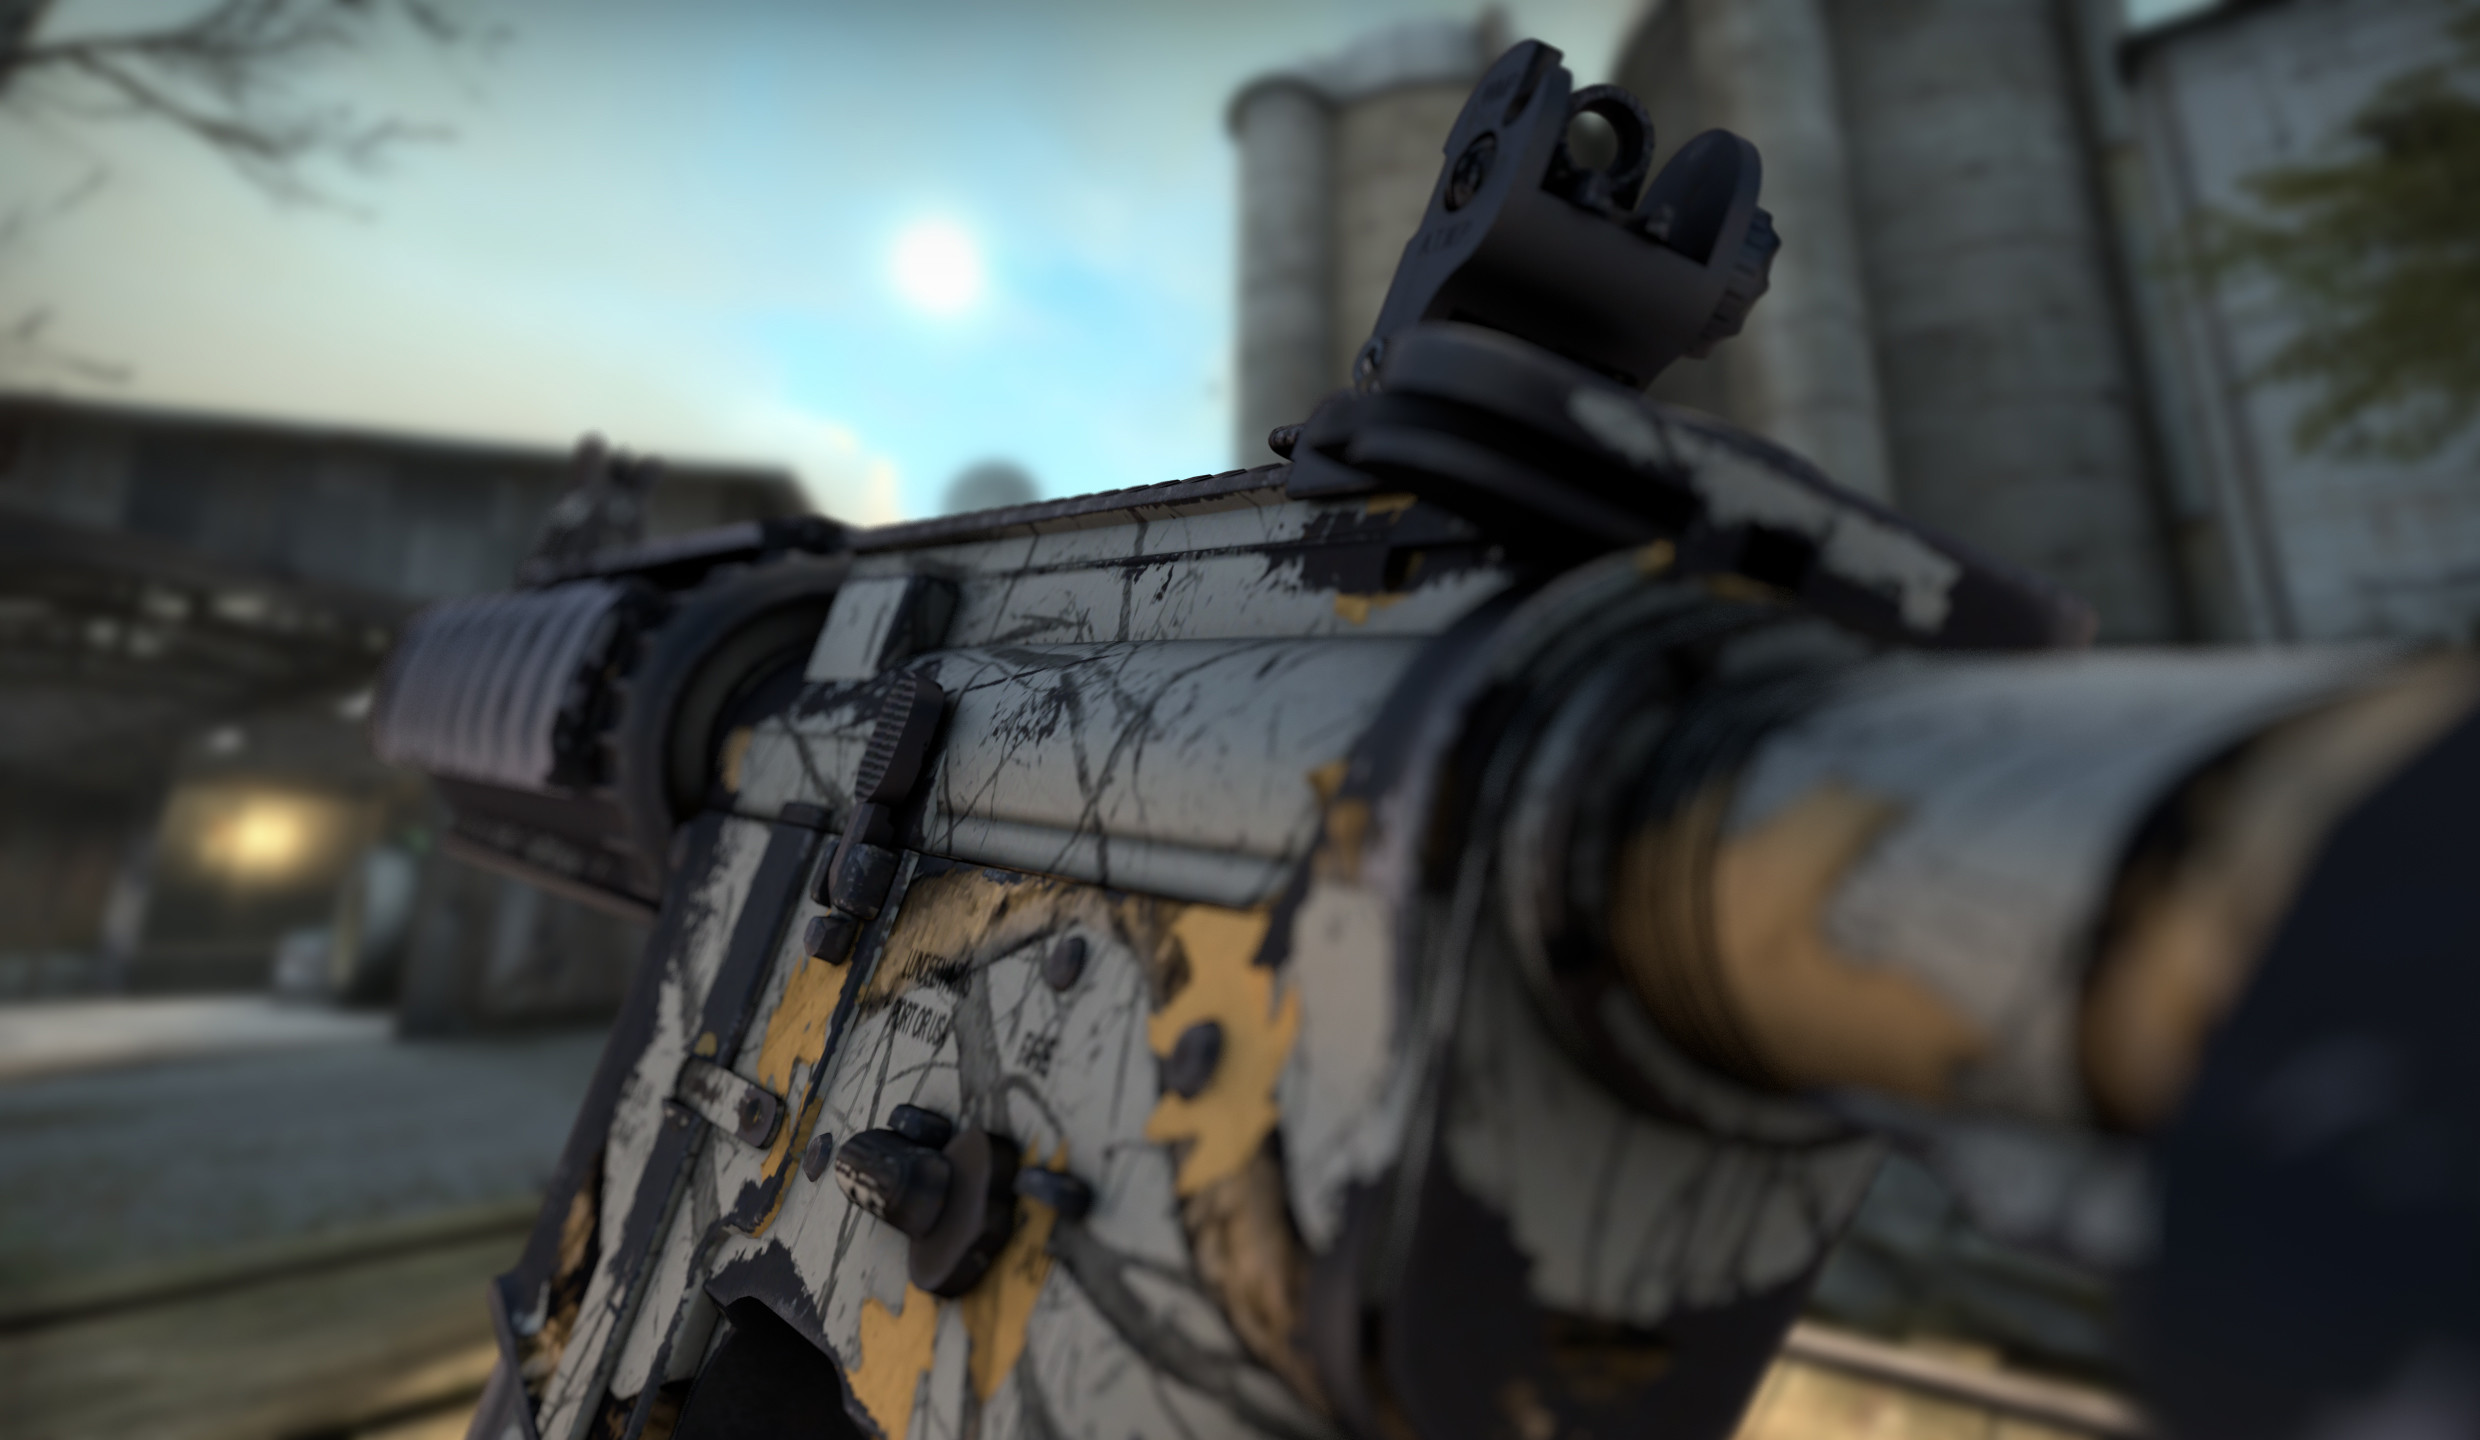 Download Awesome Cs Go Wallpaper 7831 Px High Resolution - Cs Go High  Resolution - 2480x1440 Wallpaper 